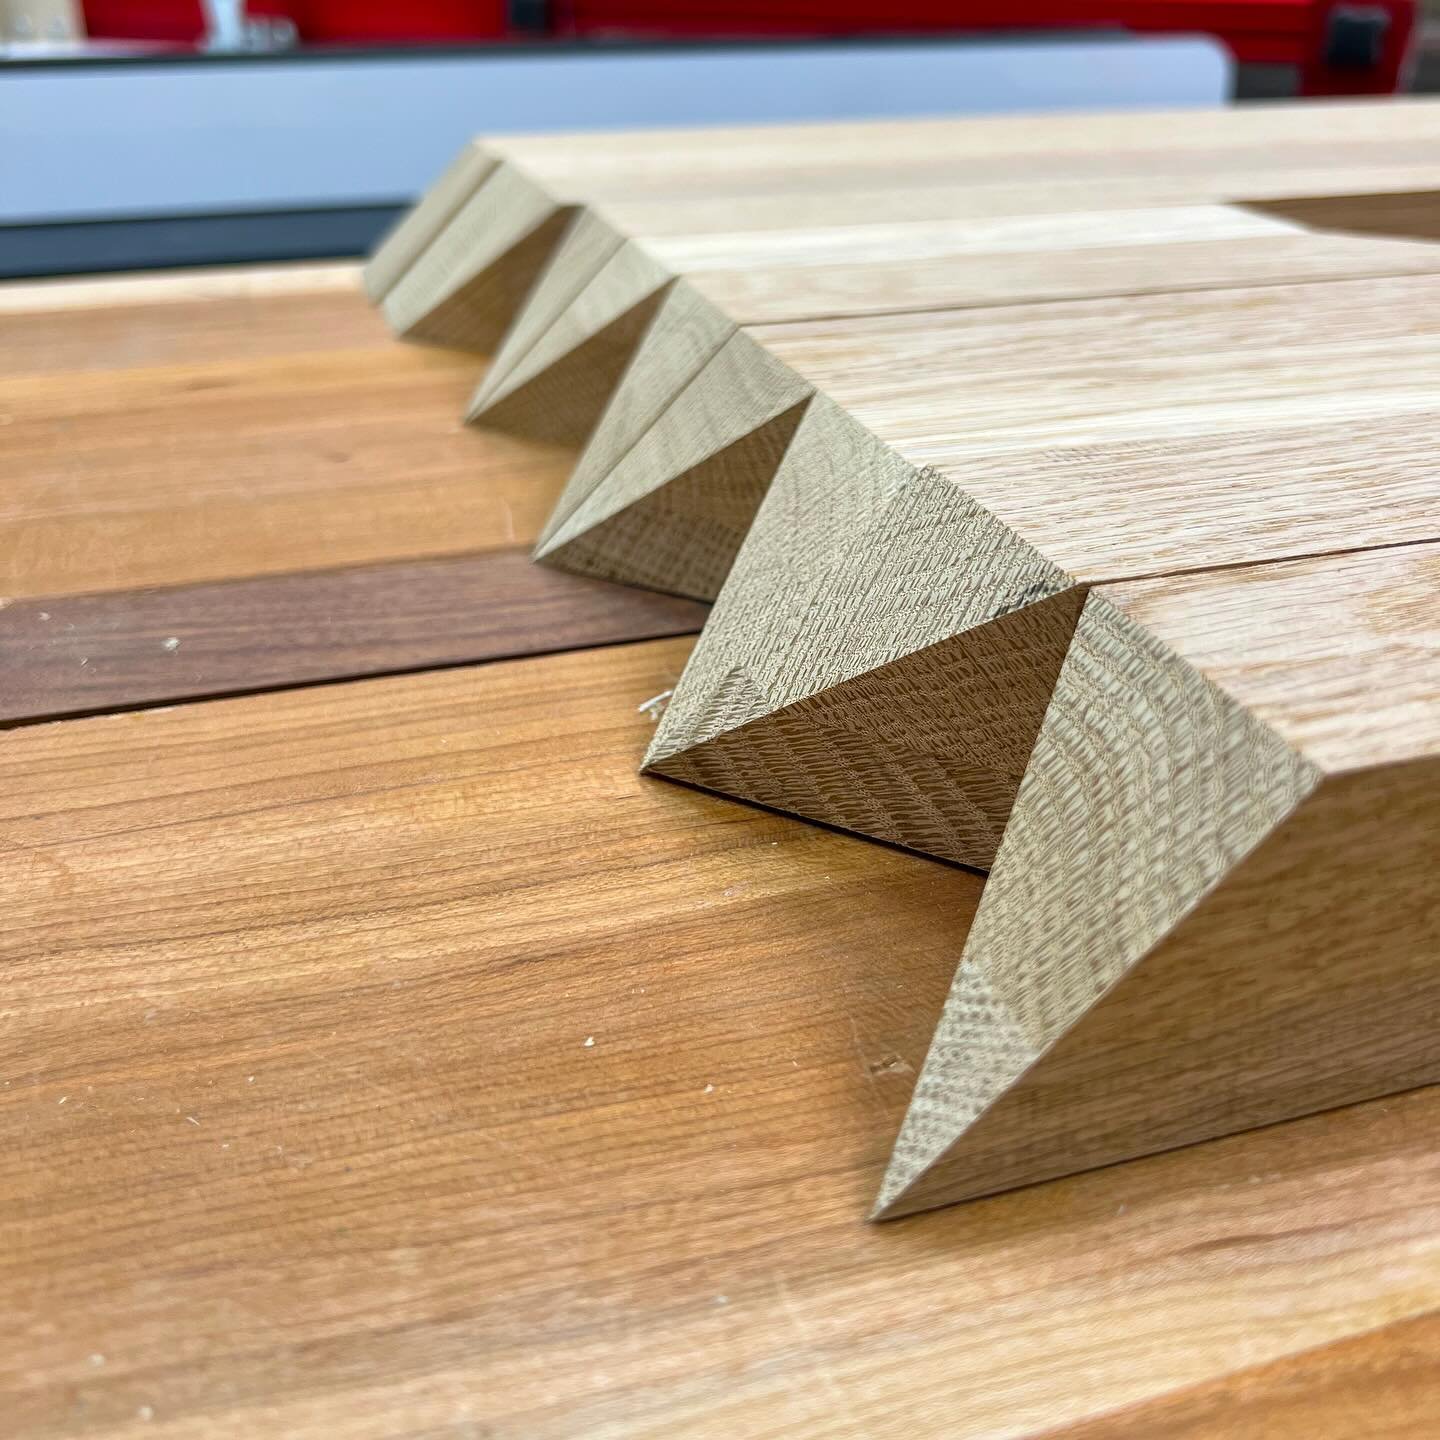 There comes a point in every project where you can see your vision coming to reality. This is one of the most exciting and rewarding aspects of the process. The base is coming together.
.
.
.
.
.
.
#joinery #joinerydesign #woodwork #woodworkersofinst